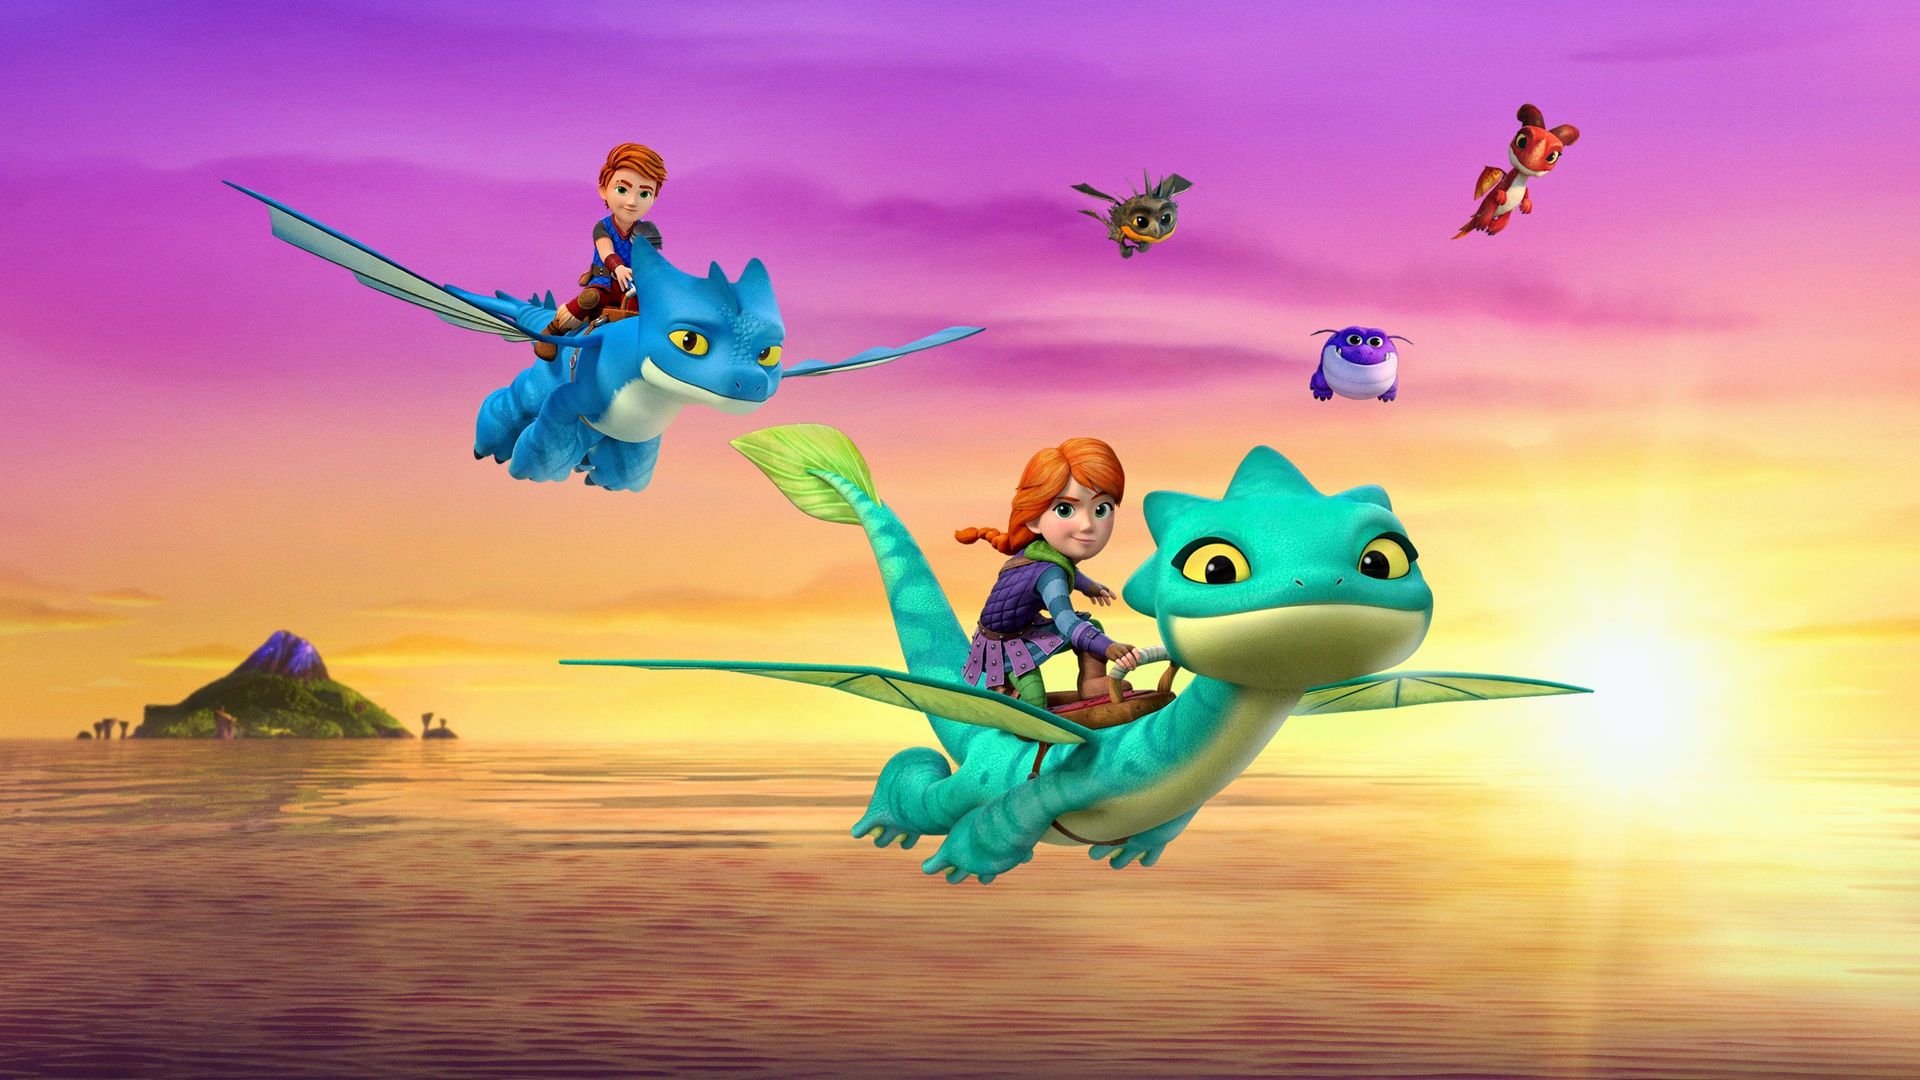 Dragons Rescue Riders: Heroes of the Sky background